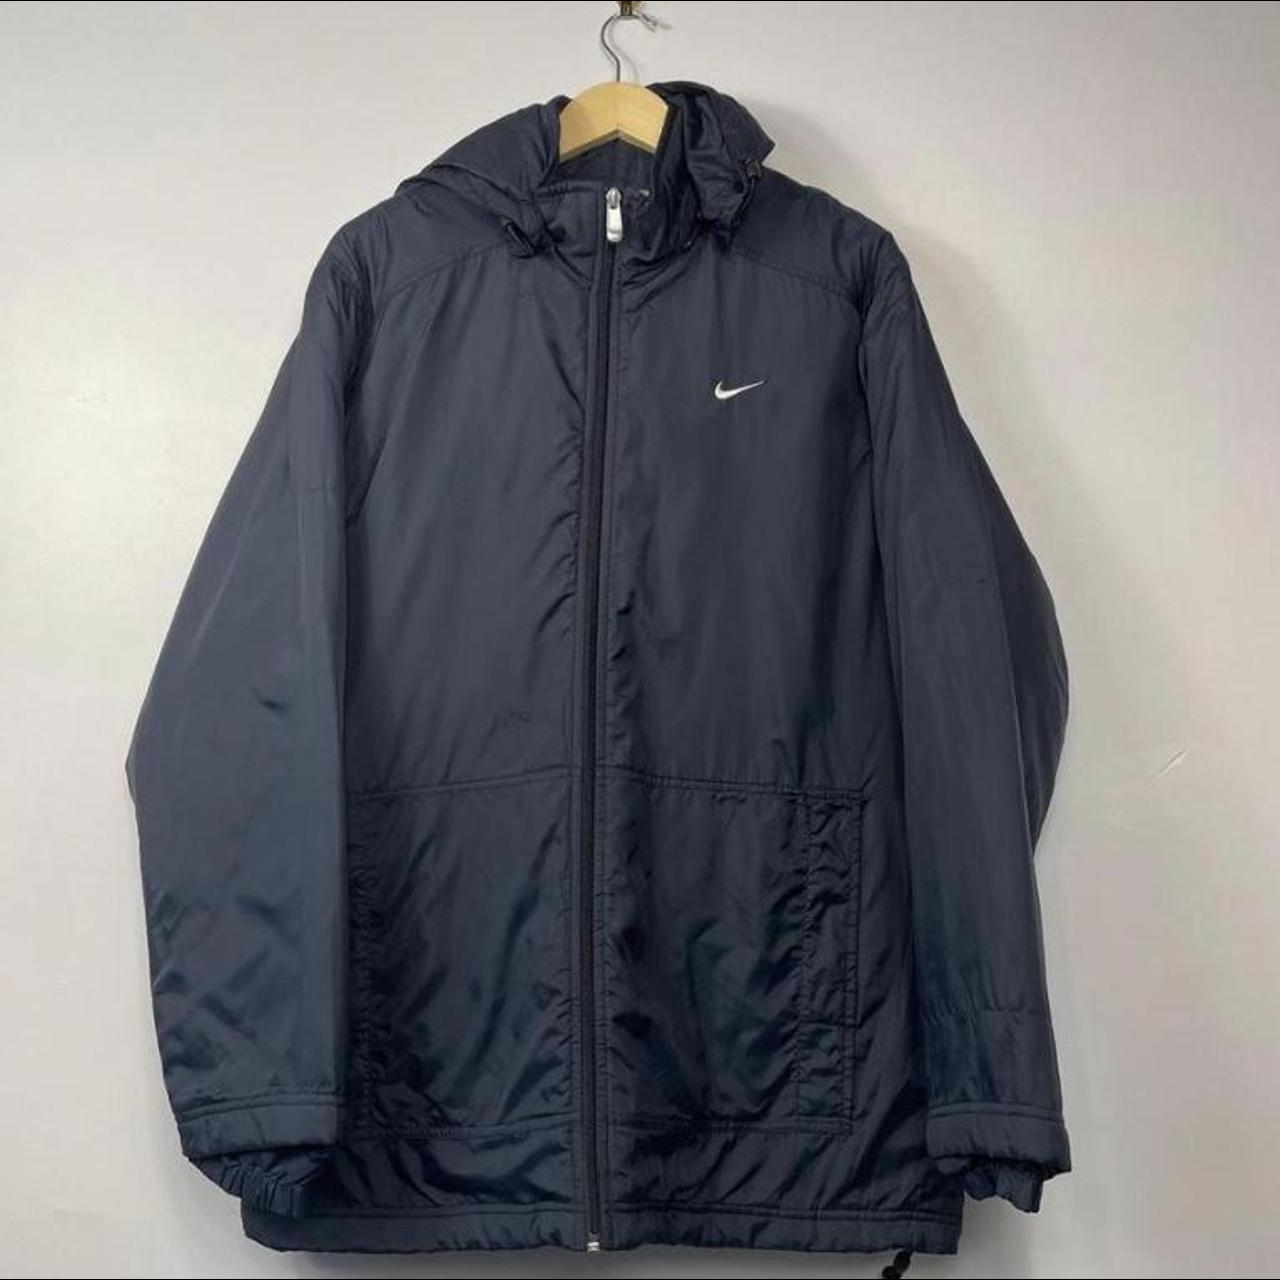 Vintage Early 00s Nike Puffer Jacket with Detachable... - Depop